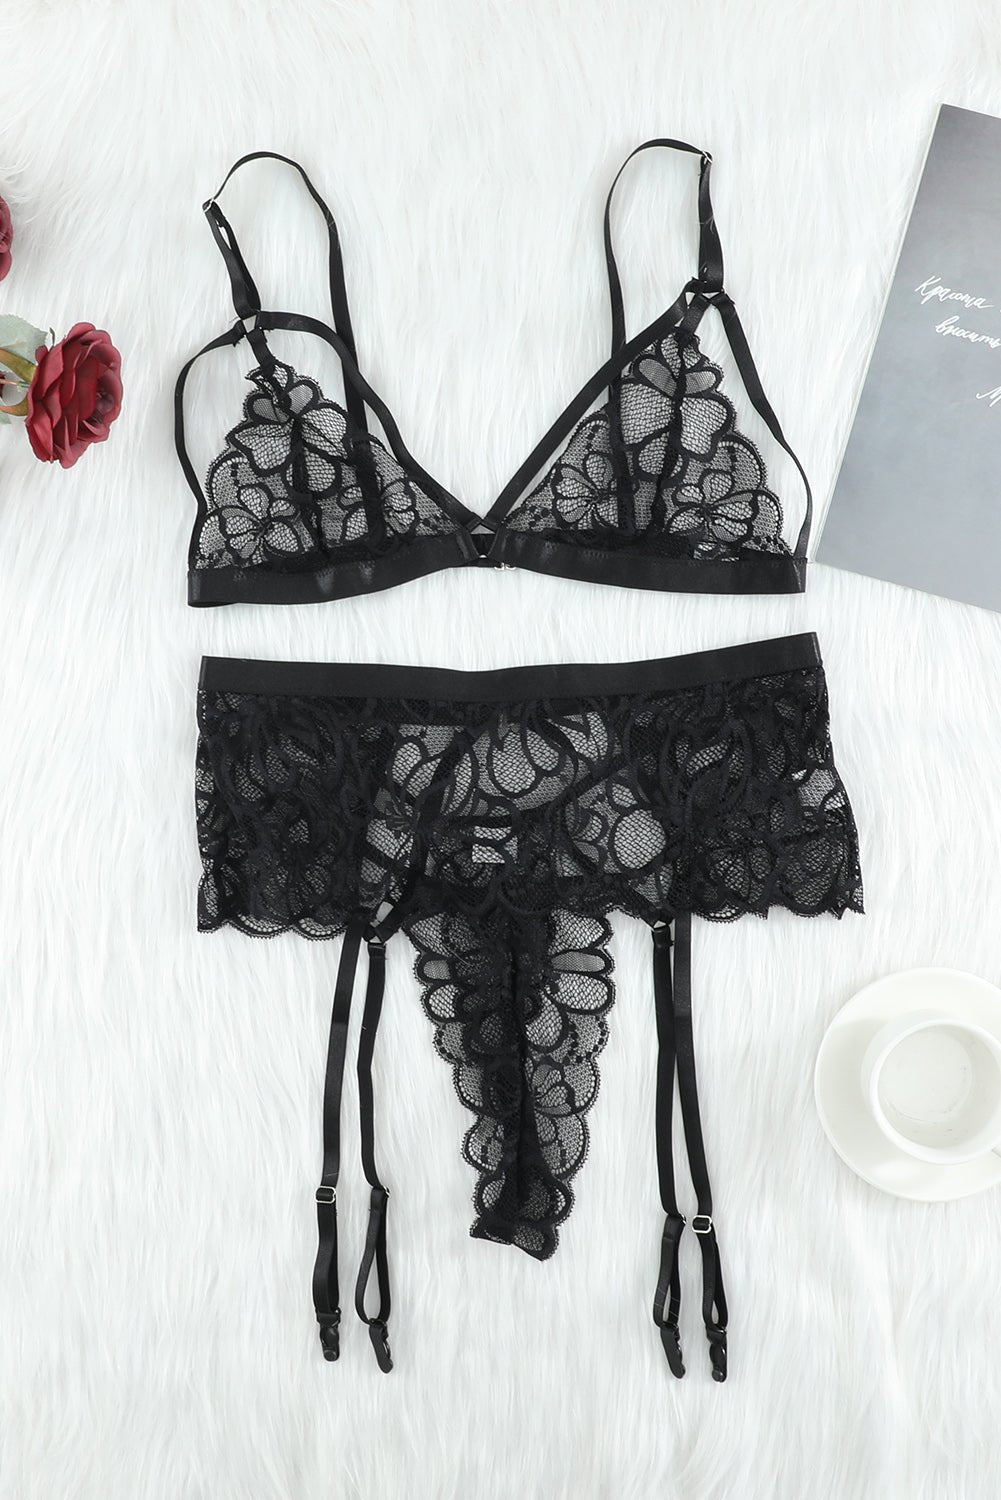 Strappy Three-Piece Lace Lingerie Set - Fashion Girl Online Store